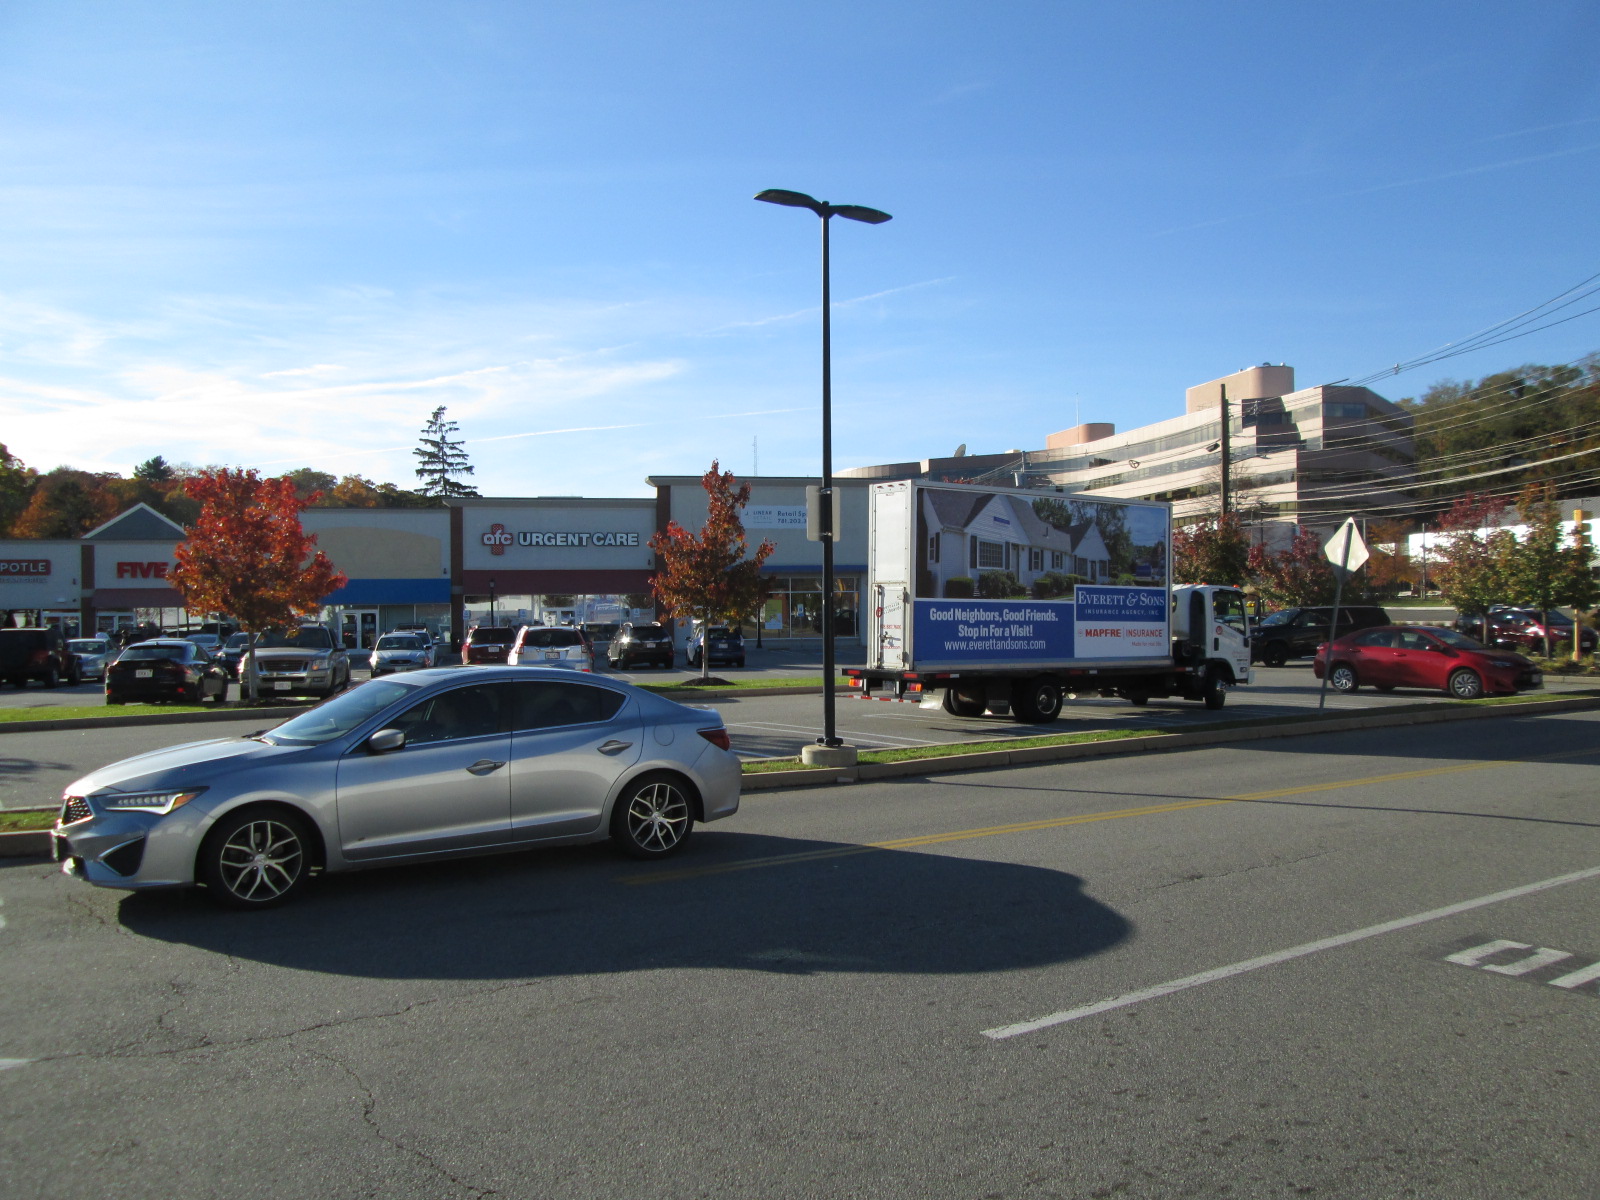 Mobile billboard truck parked at Waltham MA retail plaza.